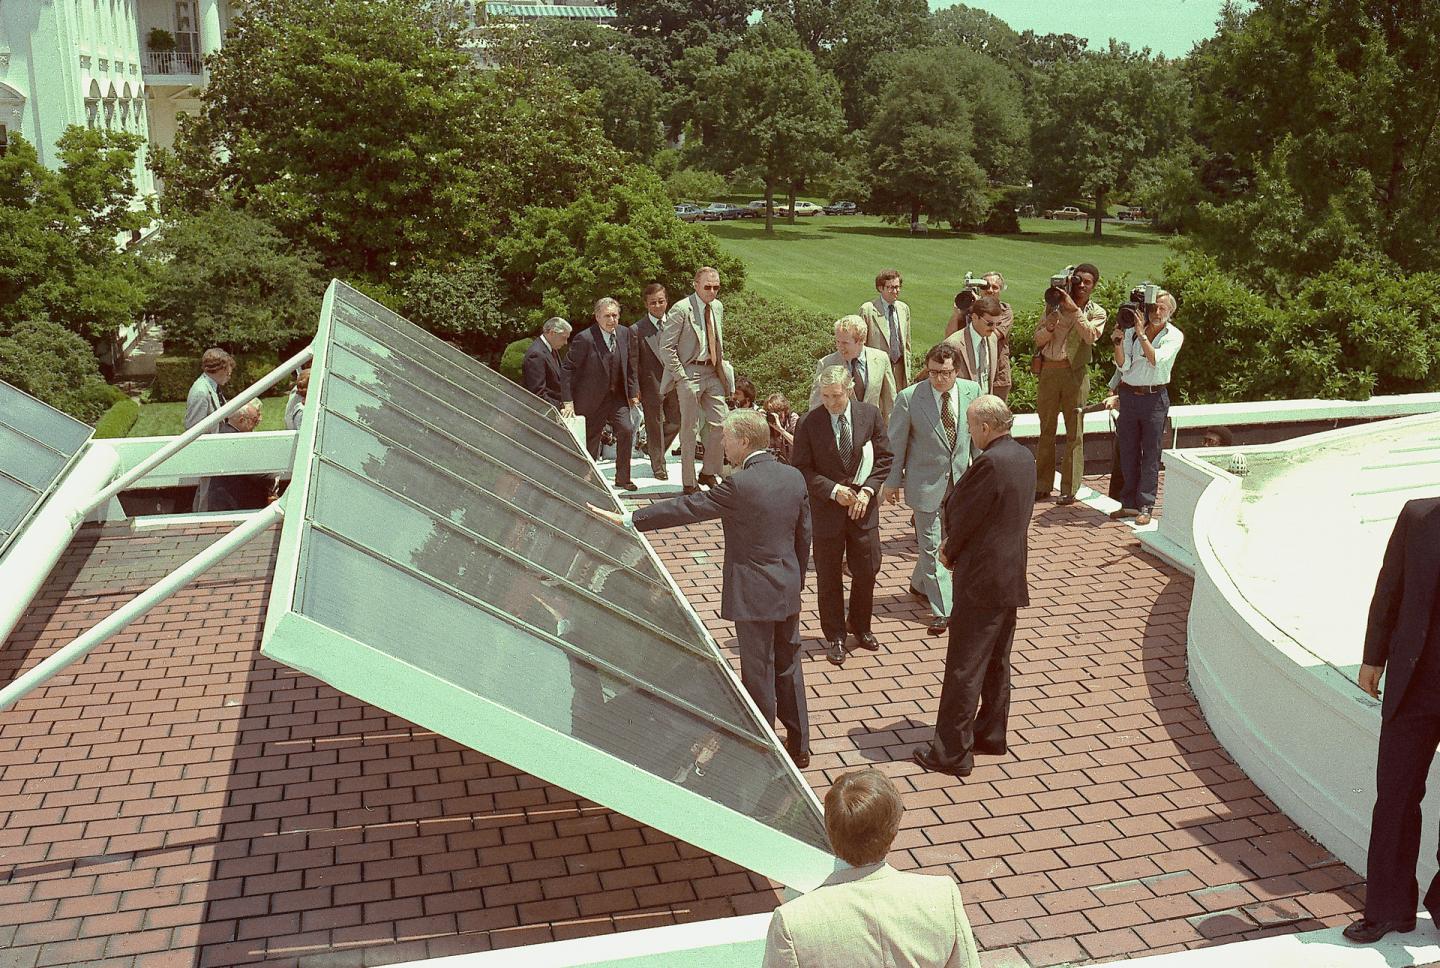 Jimmy Carter on the rooftop of the White House showing off recently installed solar panels